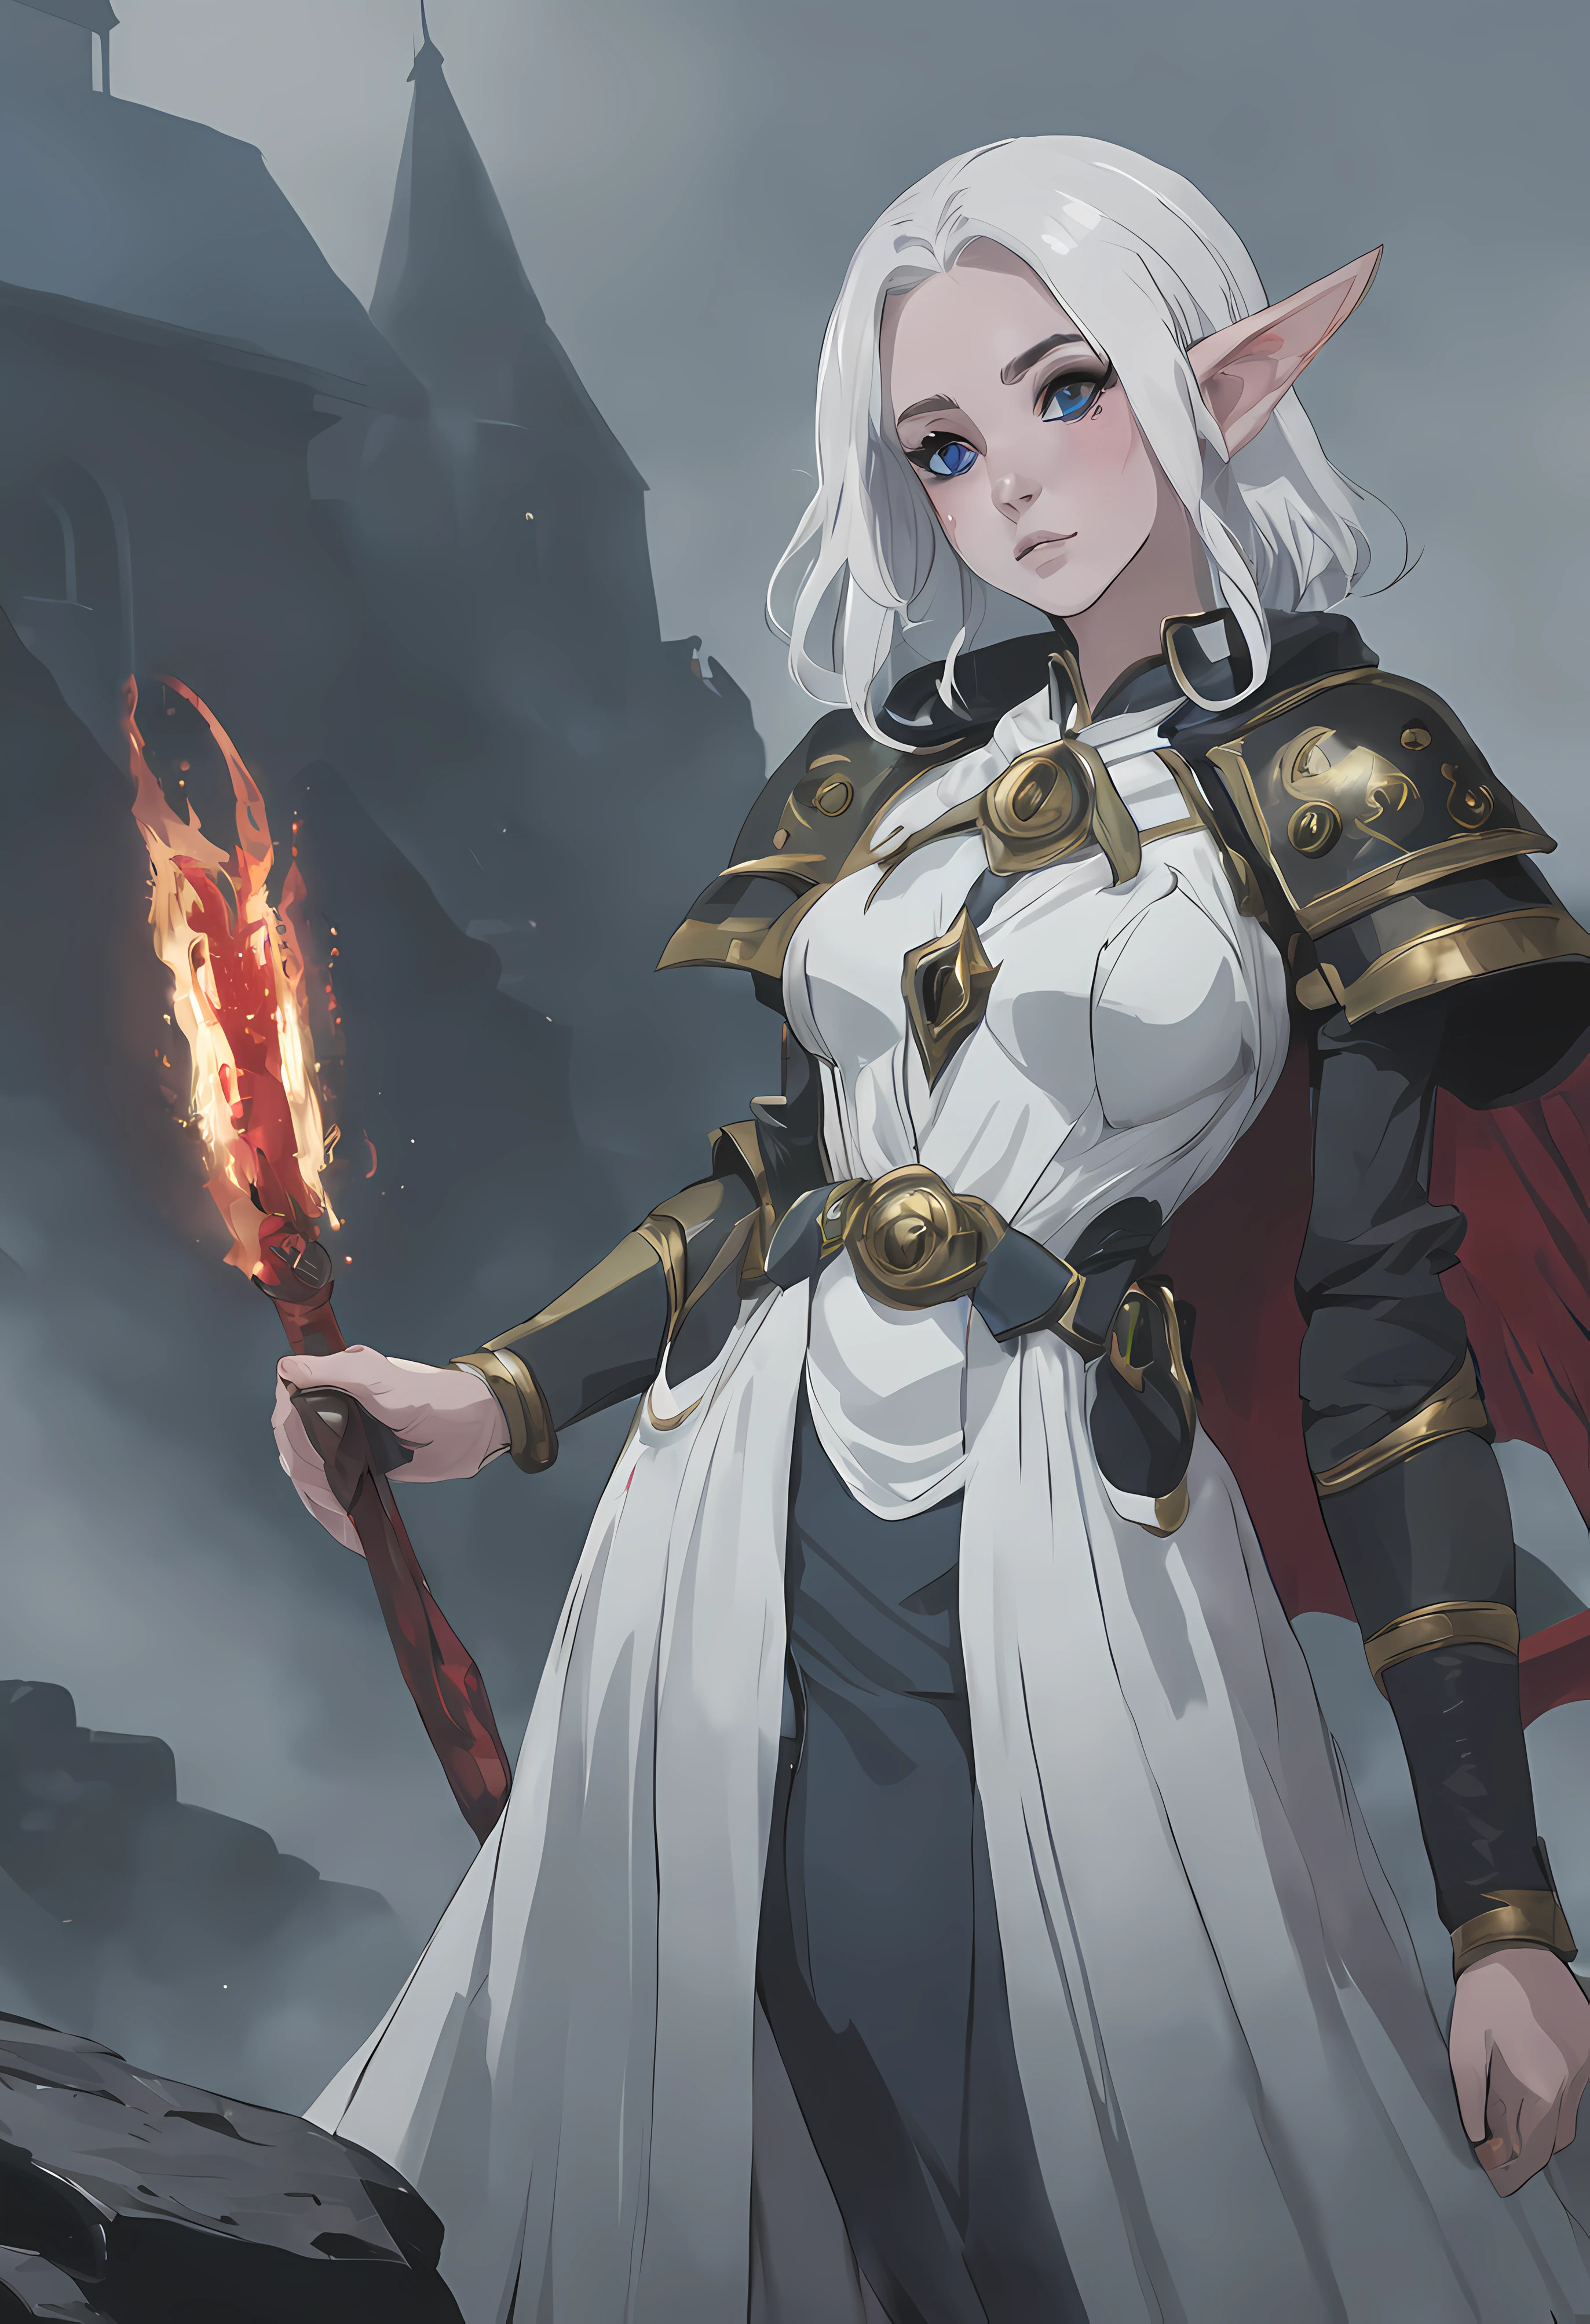 (masterpiece), best quality, expressive eyes, perfect face, Dark ((1person)), ((1woman)), hair, short bob cut hair, Realistic, warrior, black and red colour pallete, fantasy, Hair tucked behind ear, side show, Pale white skin, blue eyes, freckles, elf ears, 1woman, female, pretty, tall, dark robes, armour, fully clothed, muted colours, brush strokes, realism, Dark fantasy style art, Beautiful necromancer, baldurs gate 3, By Yang J.